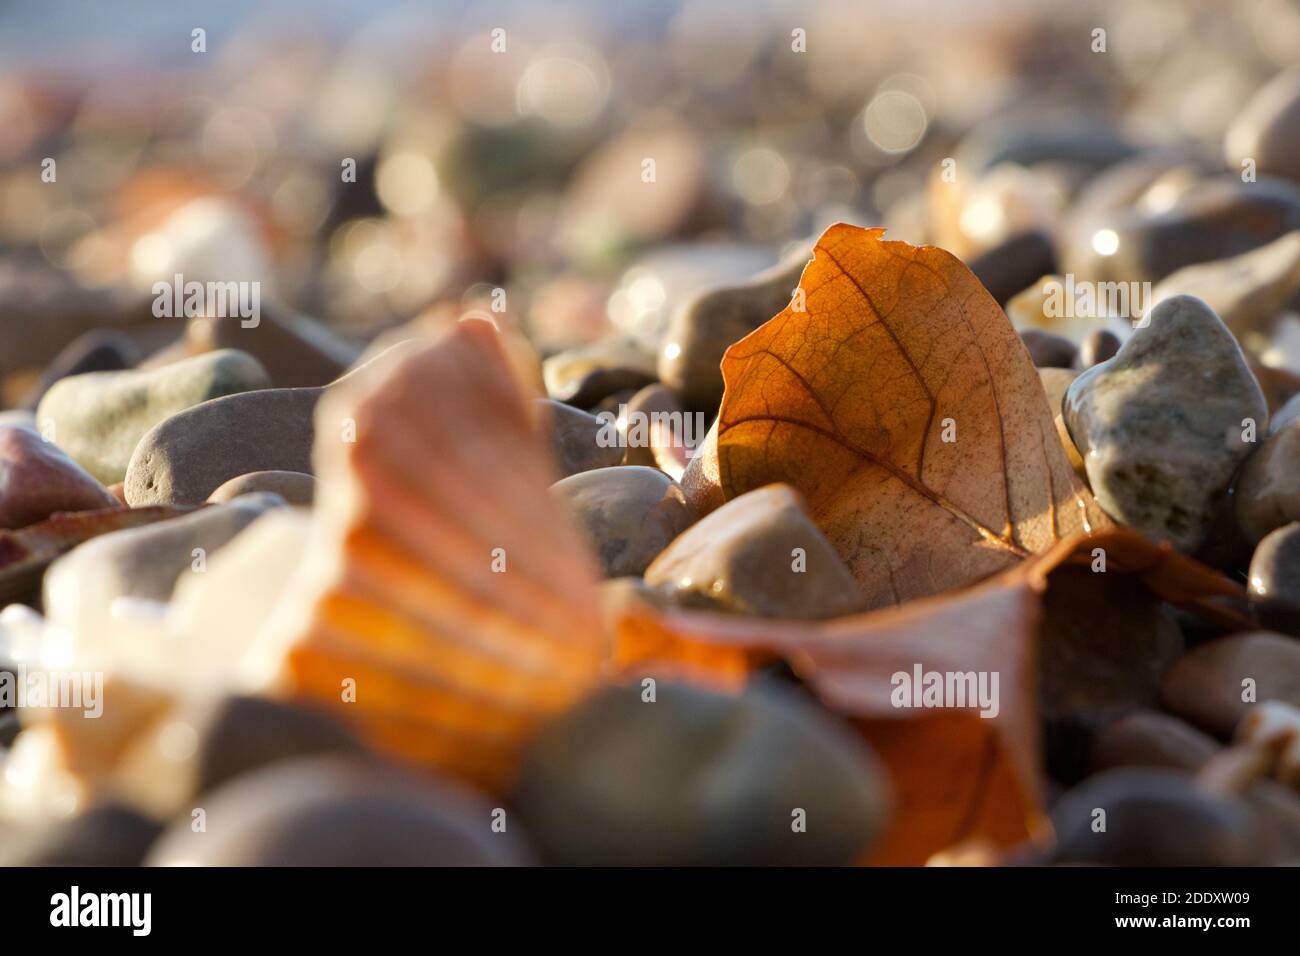 Pebbles and a single autumn leaf on the beach at dawn in golden sunlight. Cinnamon brown warm tones. Bokeh effect behind. Stock Photo